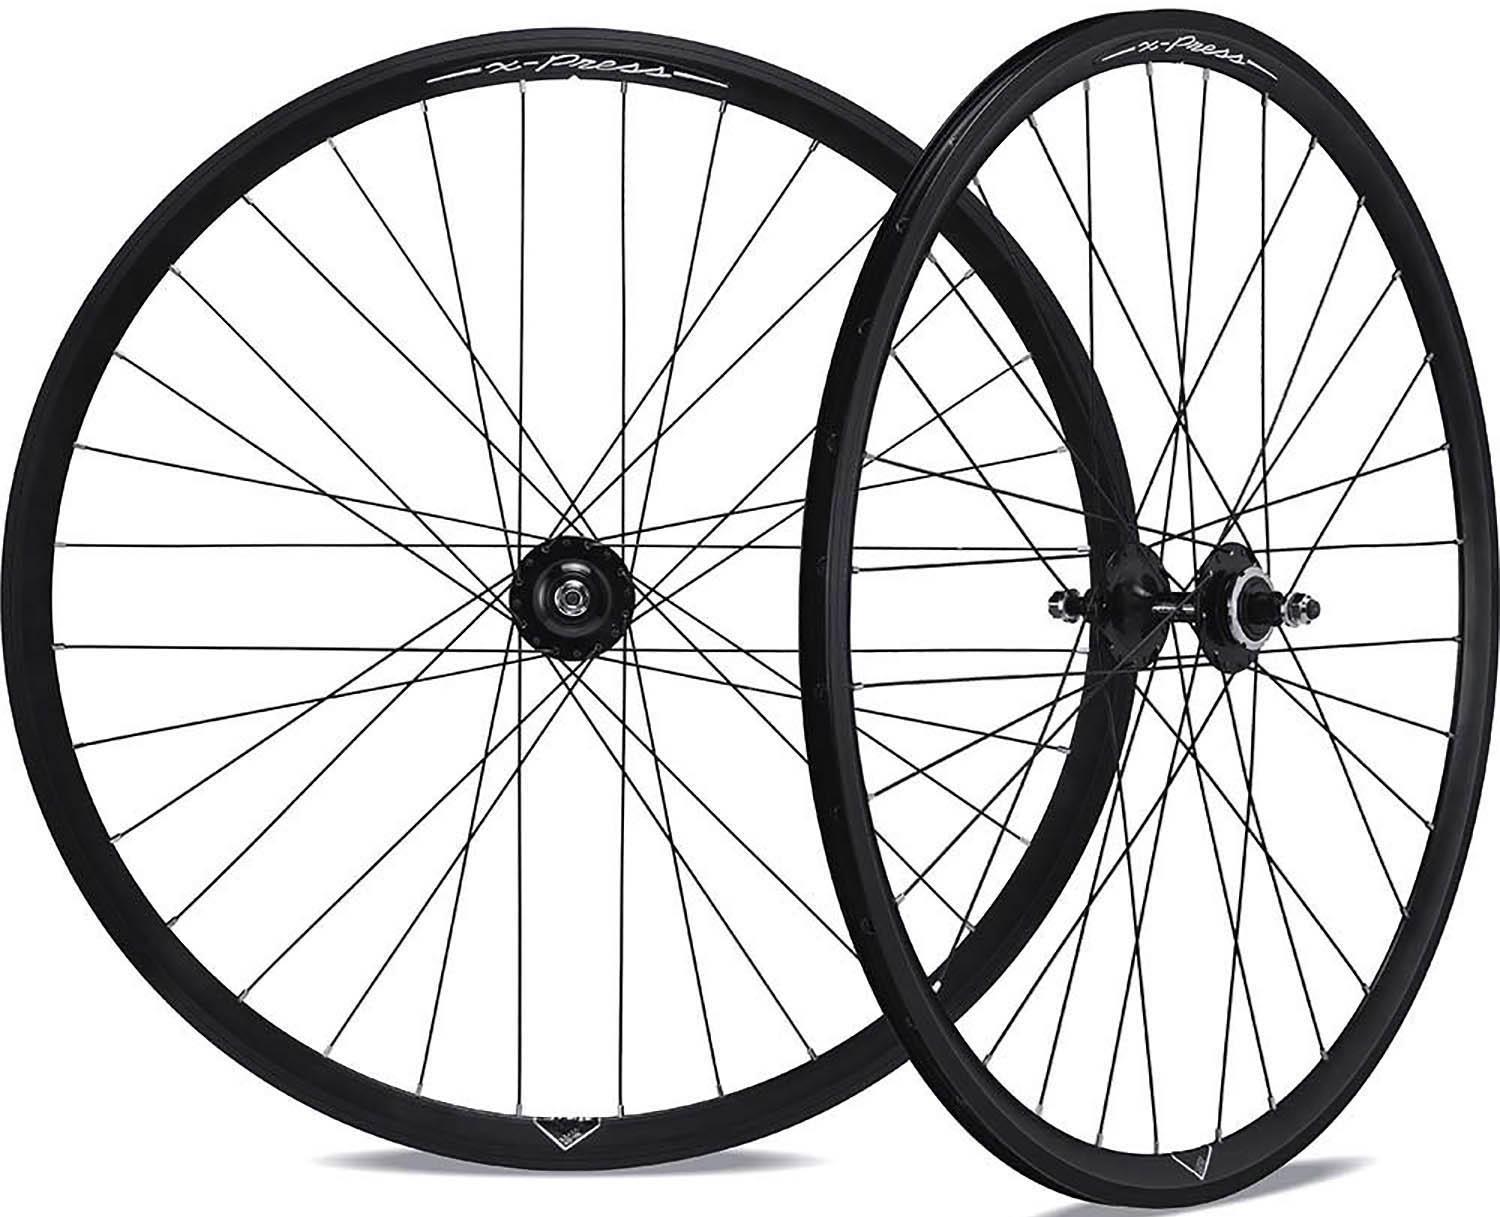 Halfords Miche Xpress Track/Road Wheelset